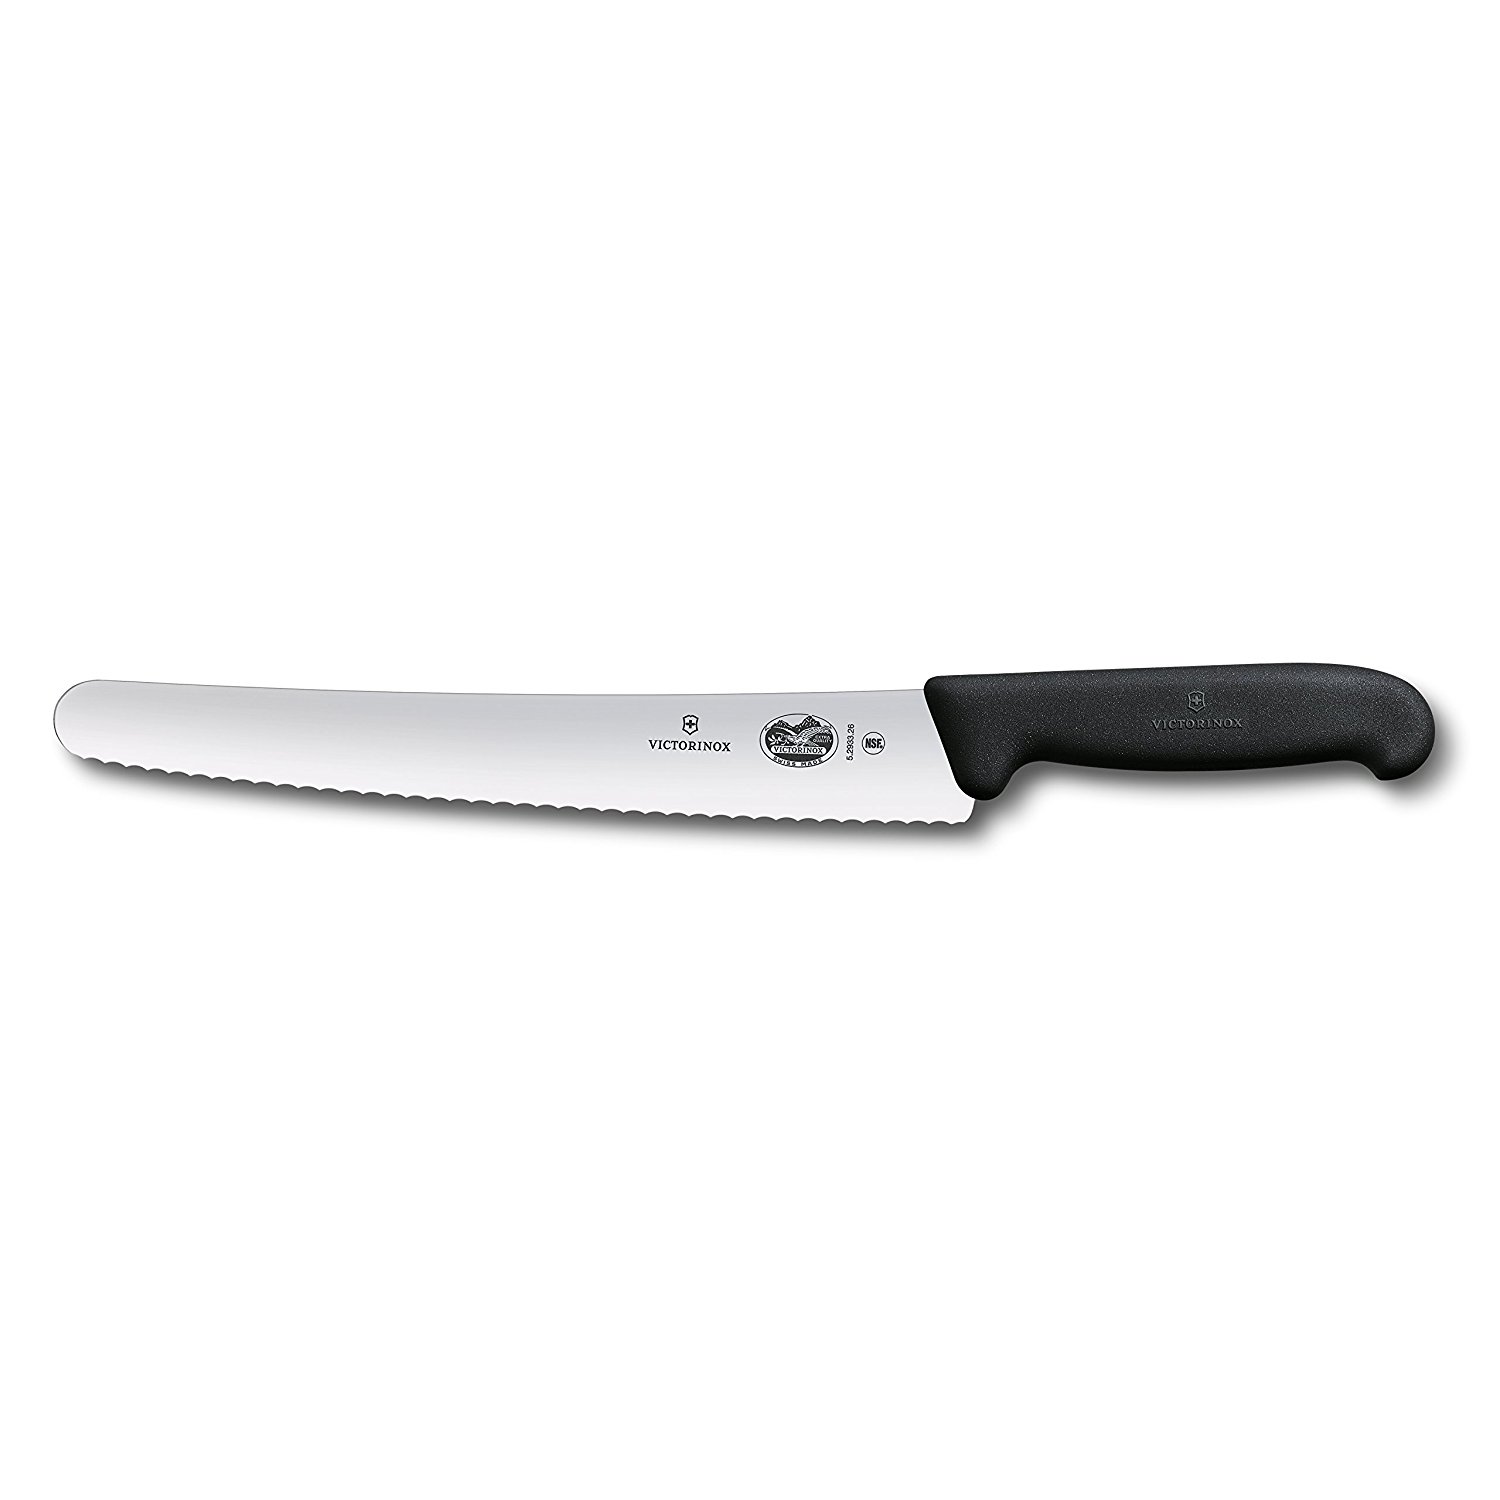 Victorinox 10.25 Inch Fibrox Pro Curved Bread Knife with Serrated Edge